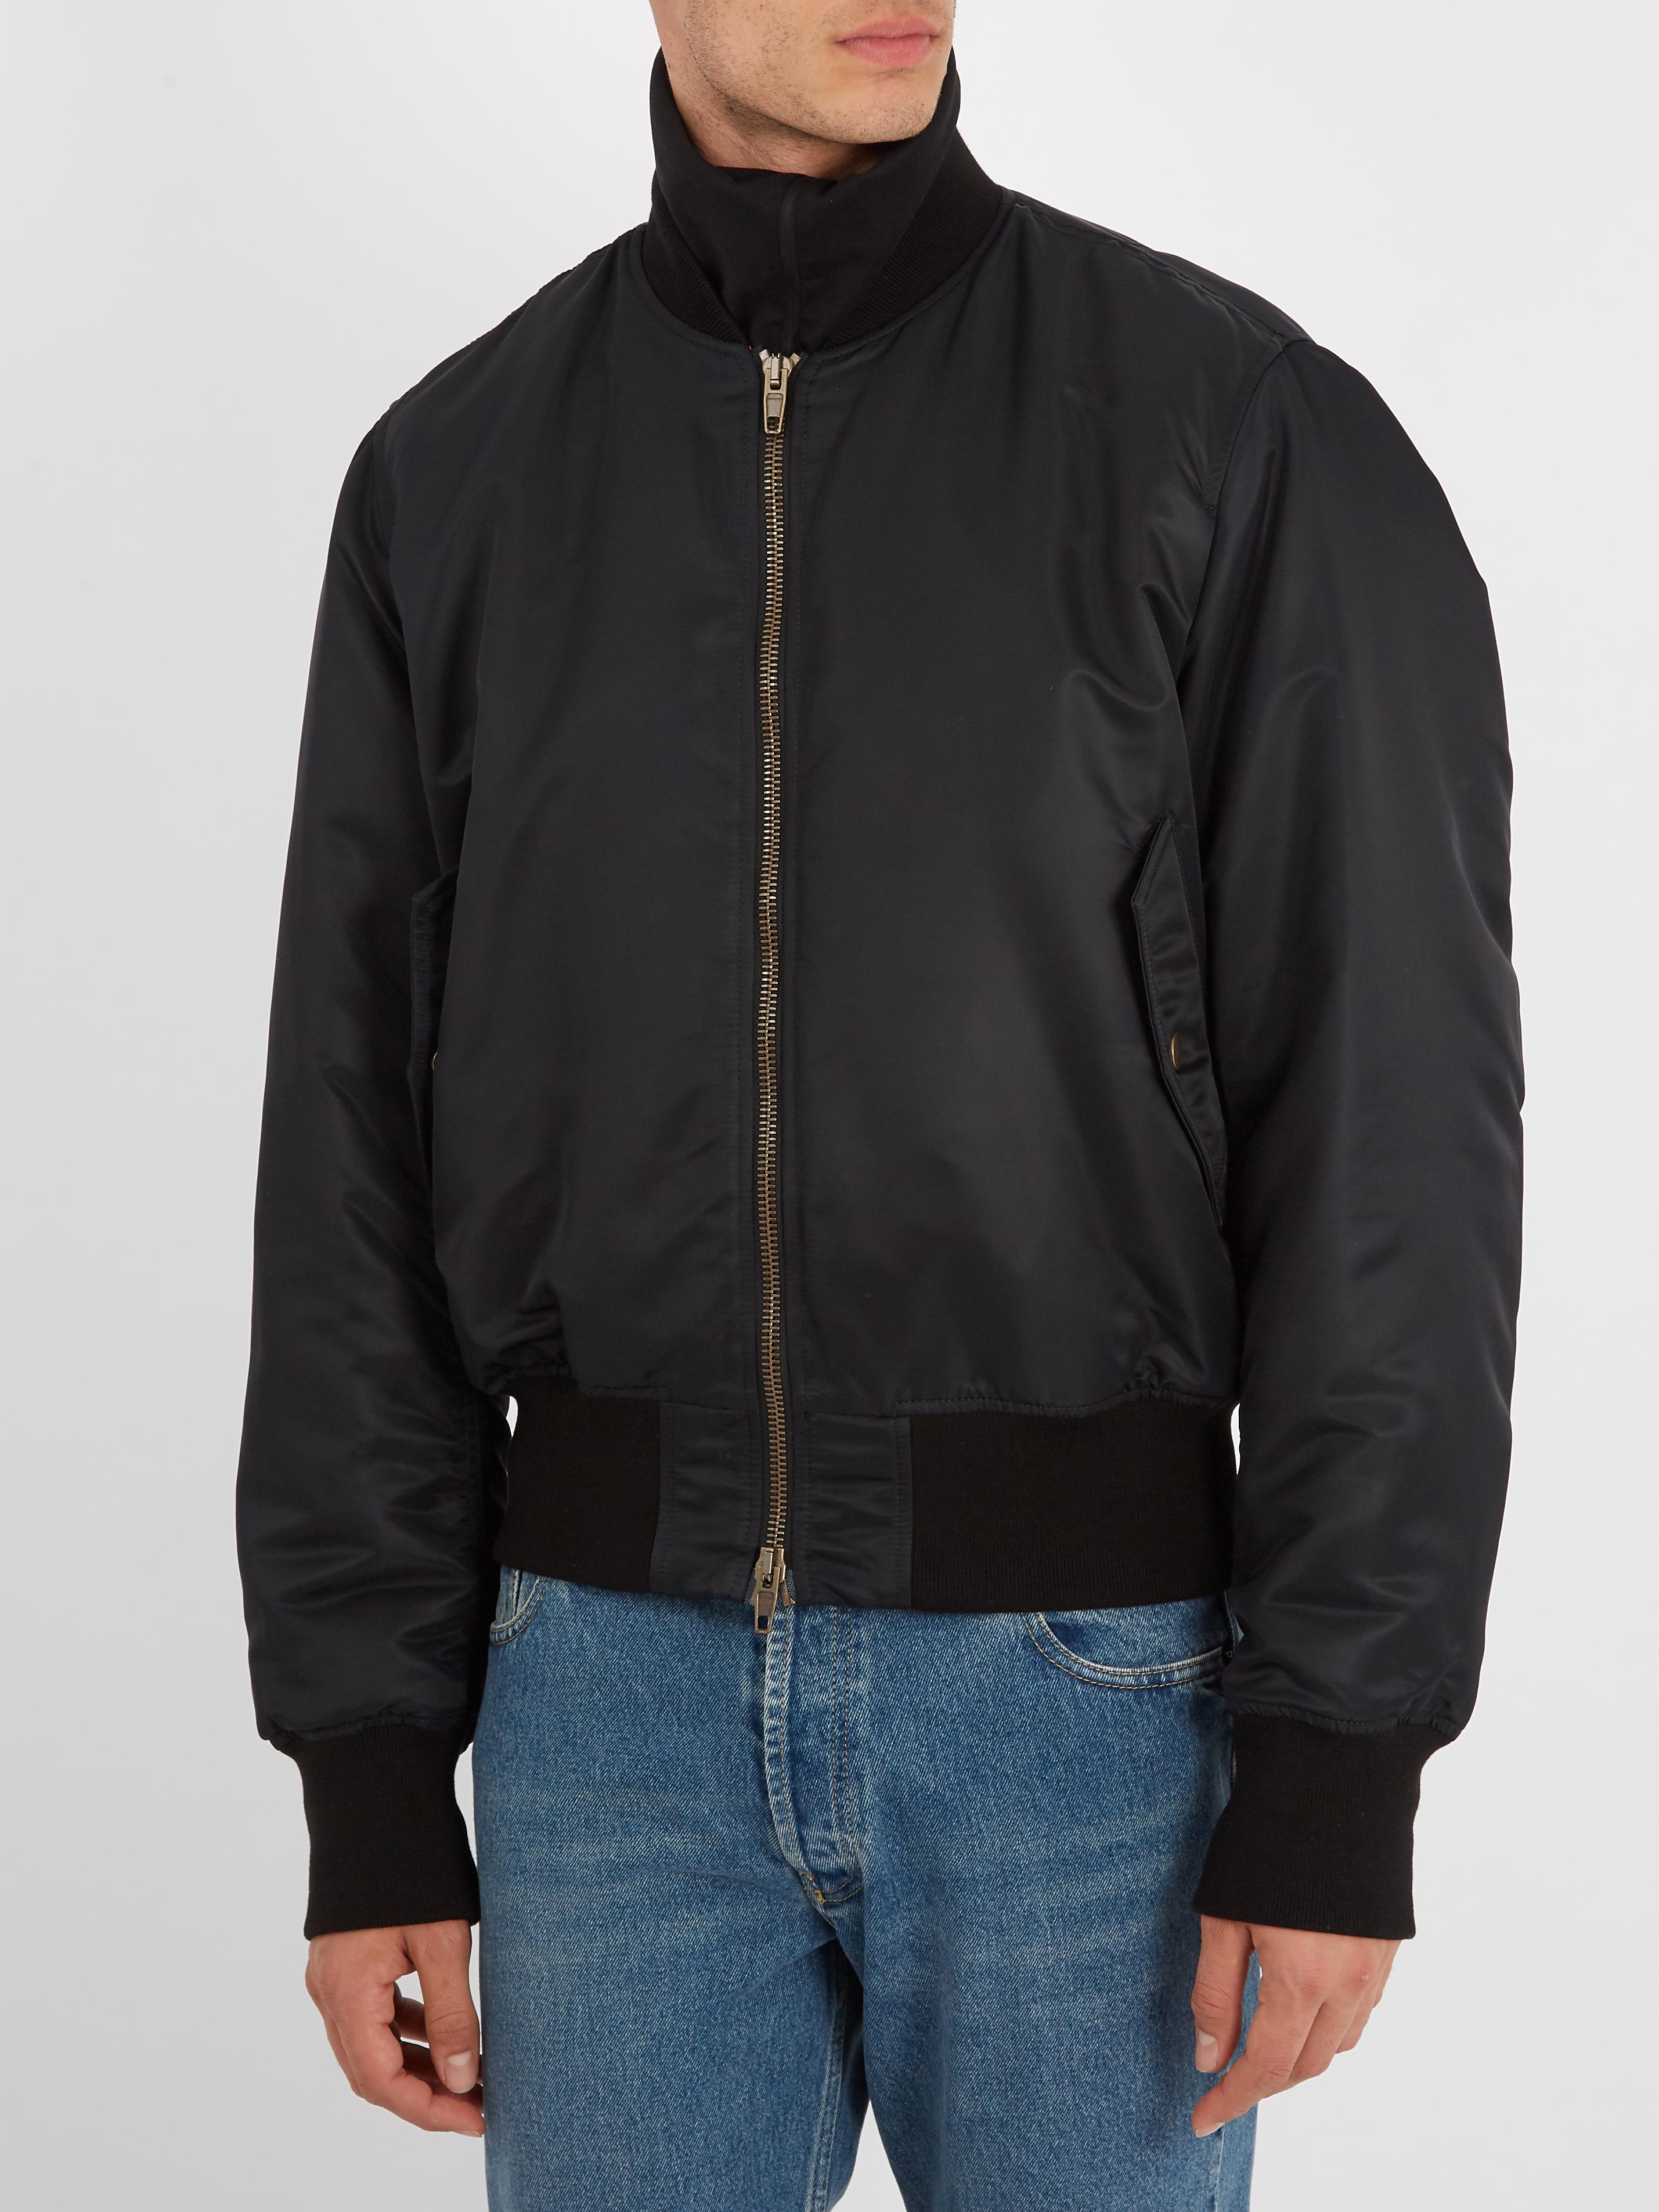 Balenciaga Paris-embroidered Bomber Jacket in Black for Men | Lyst